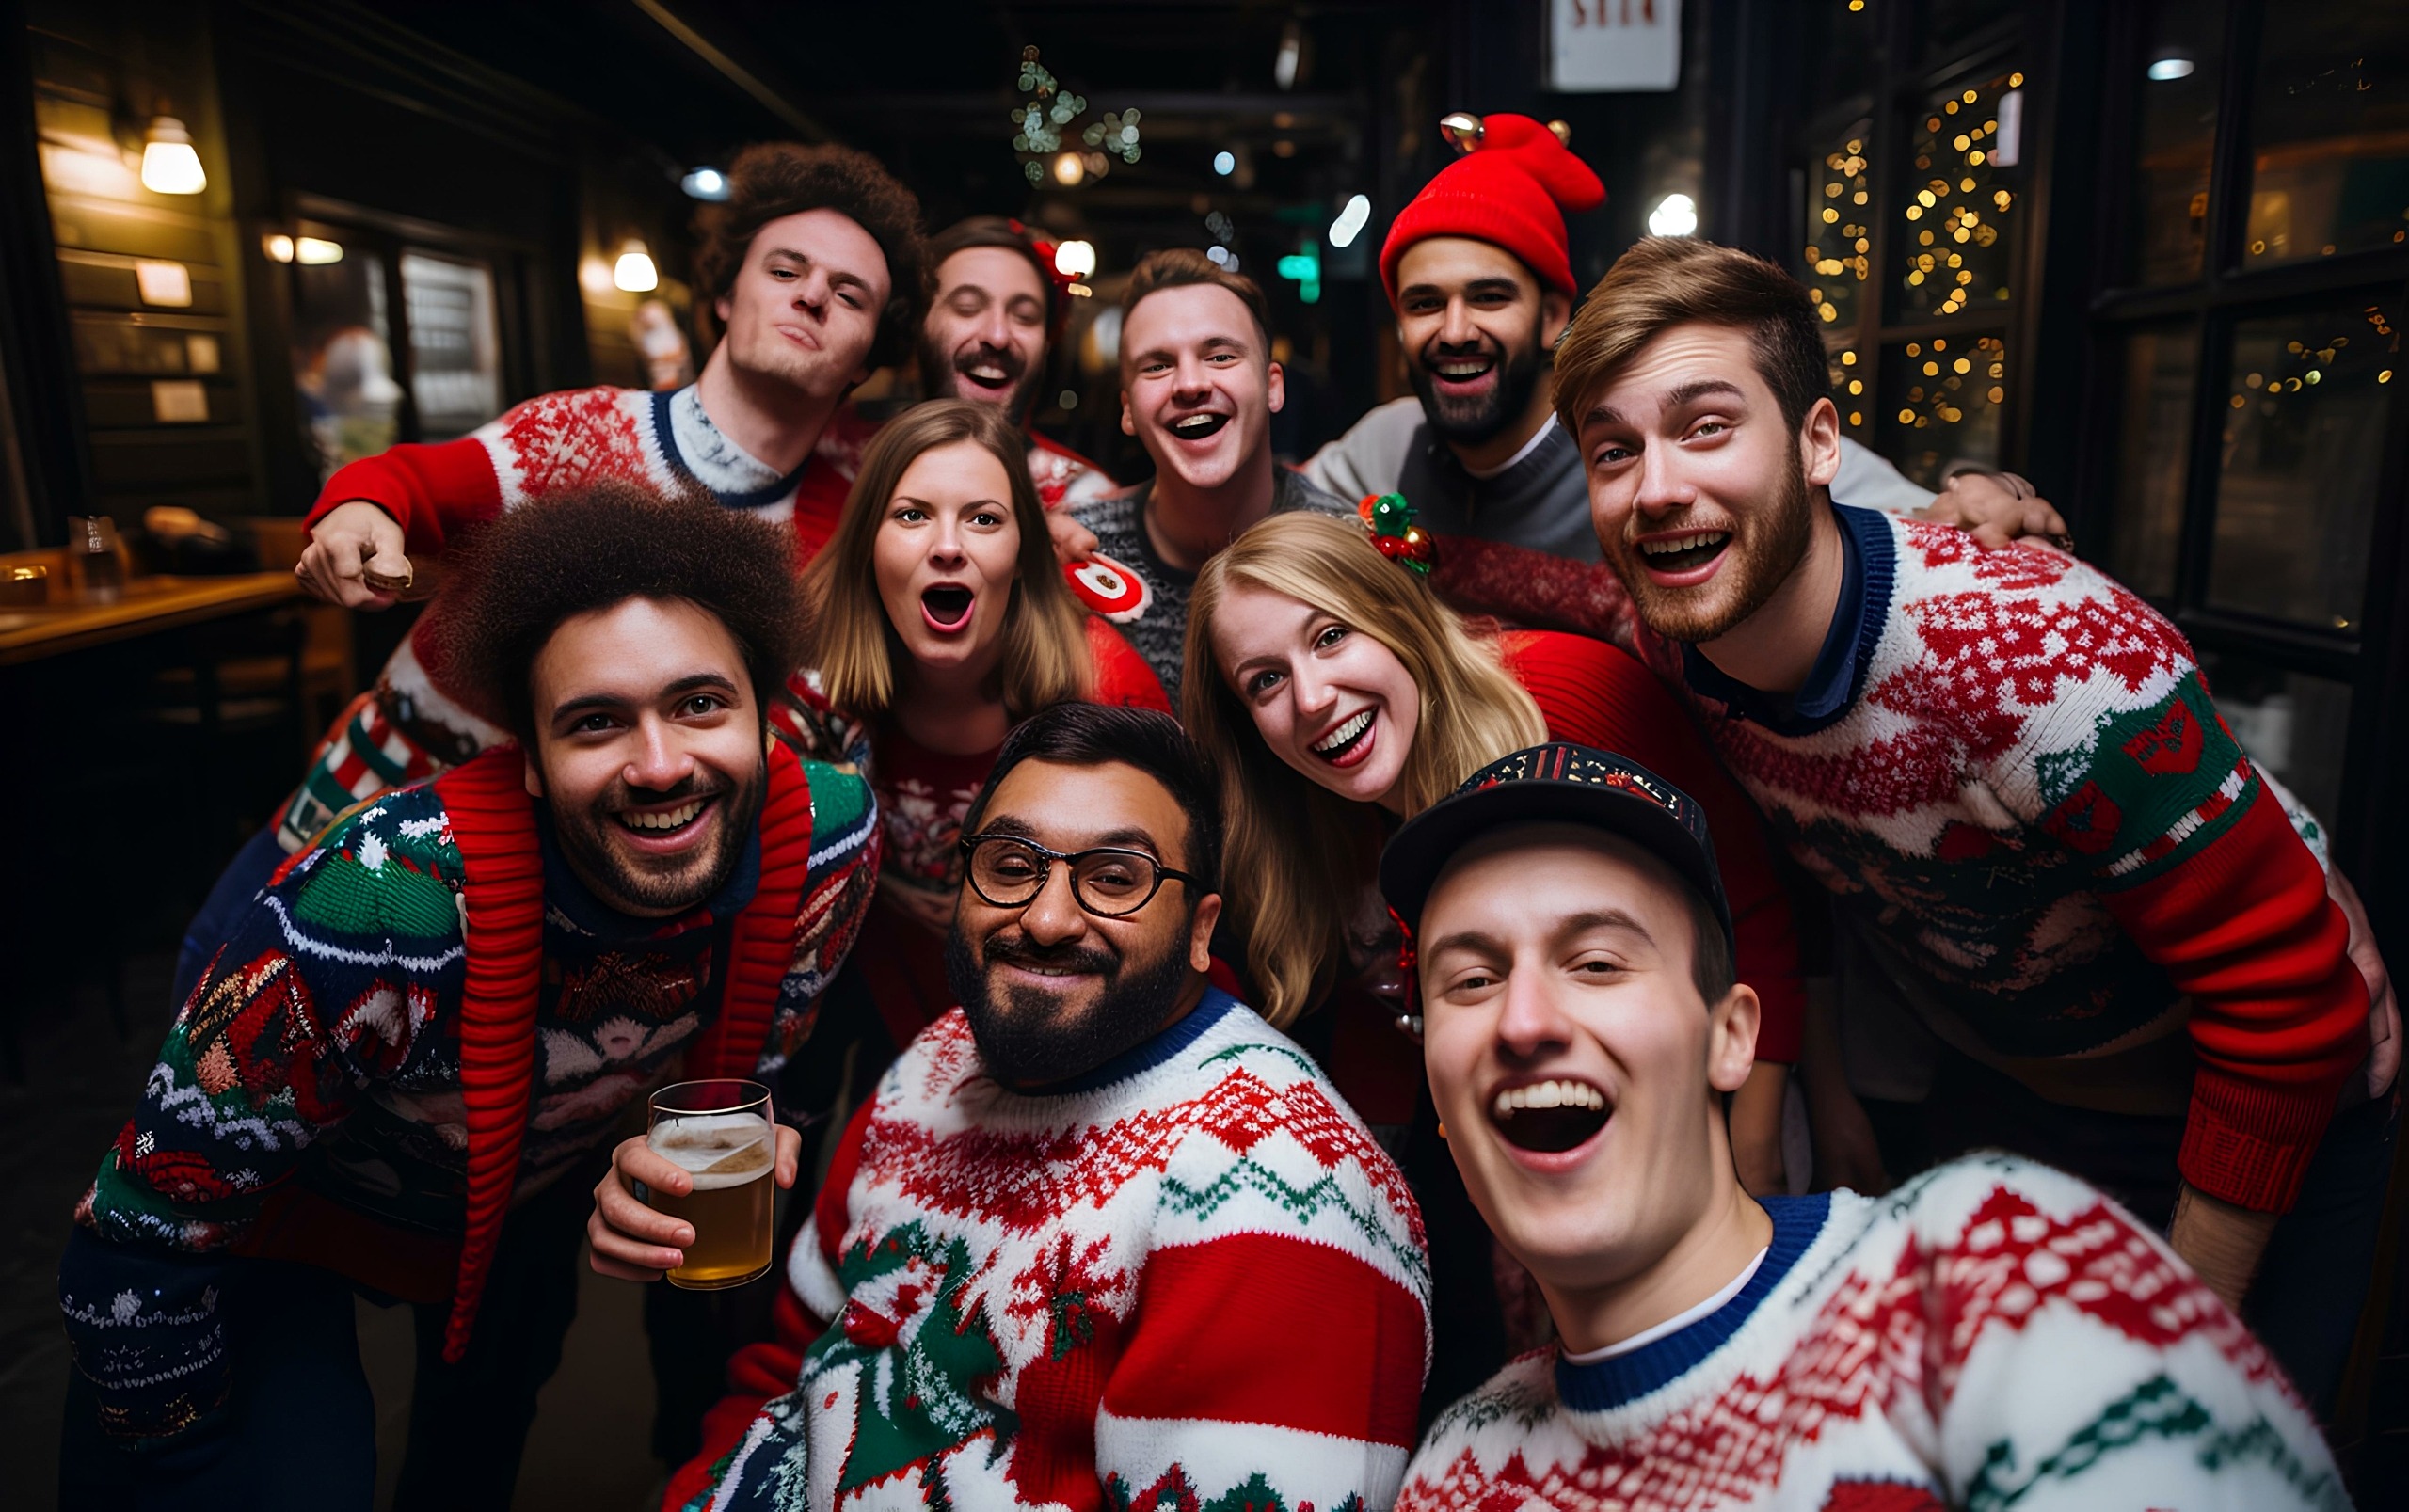 From Tacky to Trendy: The Evolution and History of Christmas Ugly Sweater Parties